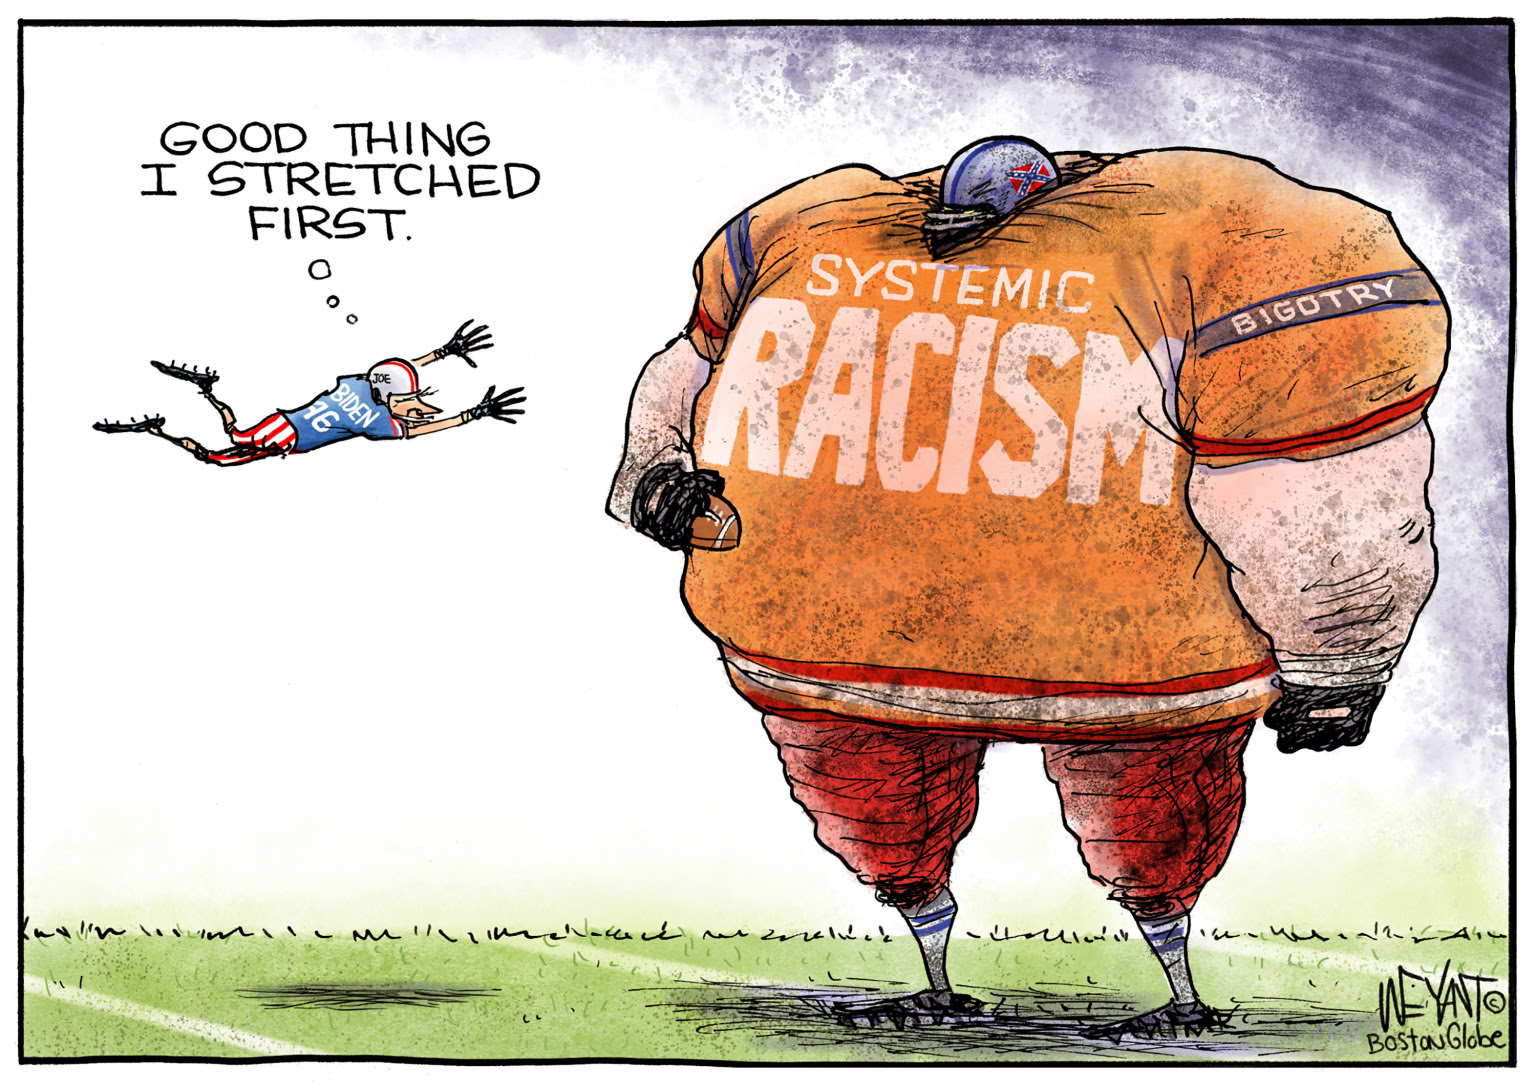 Racism thrives in the National Football League (NFL)